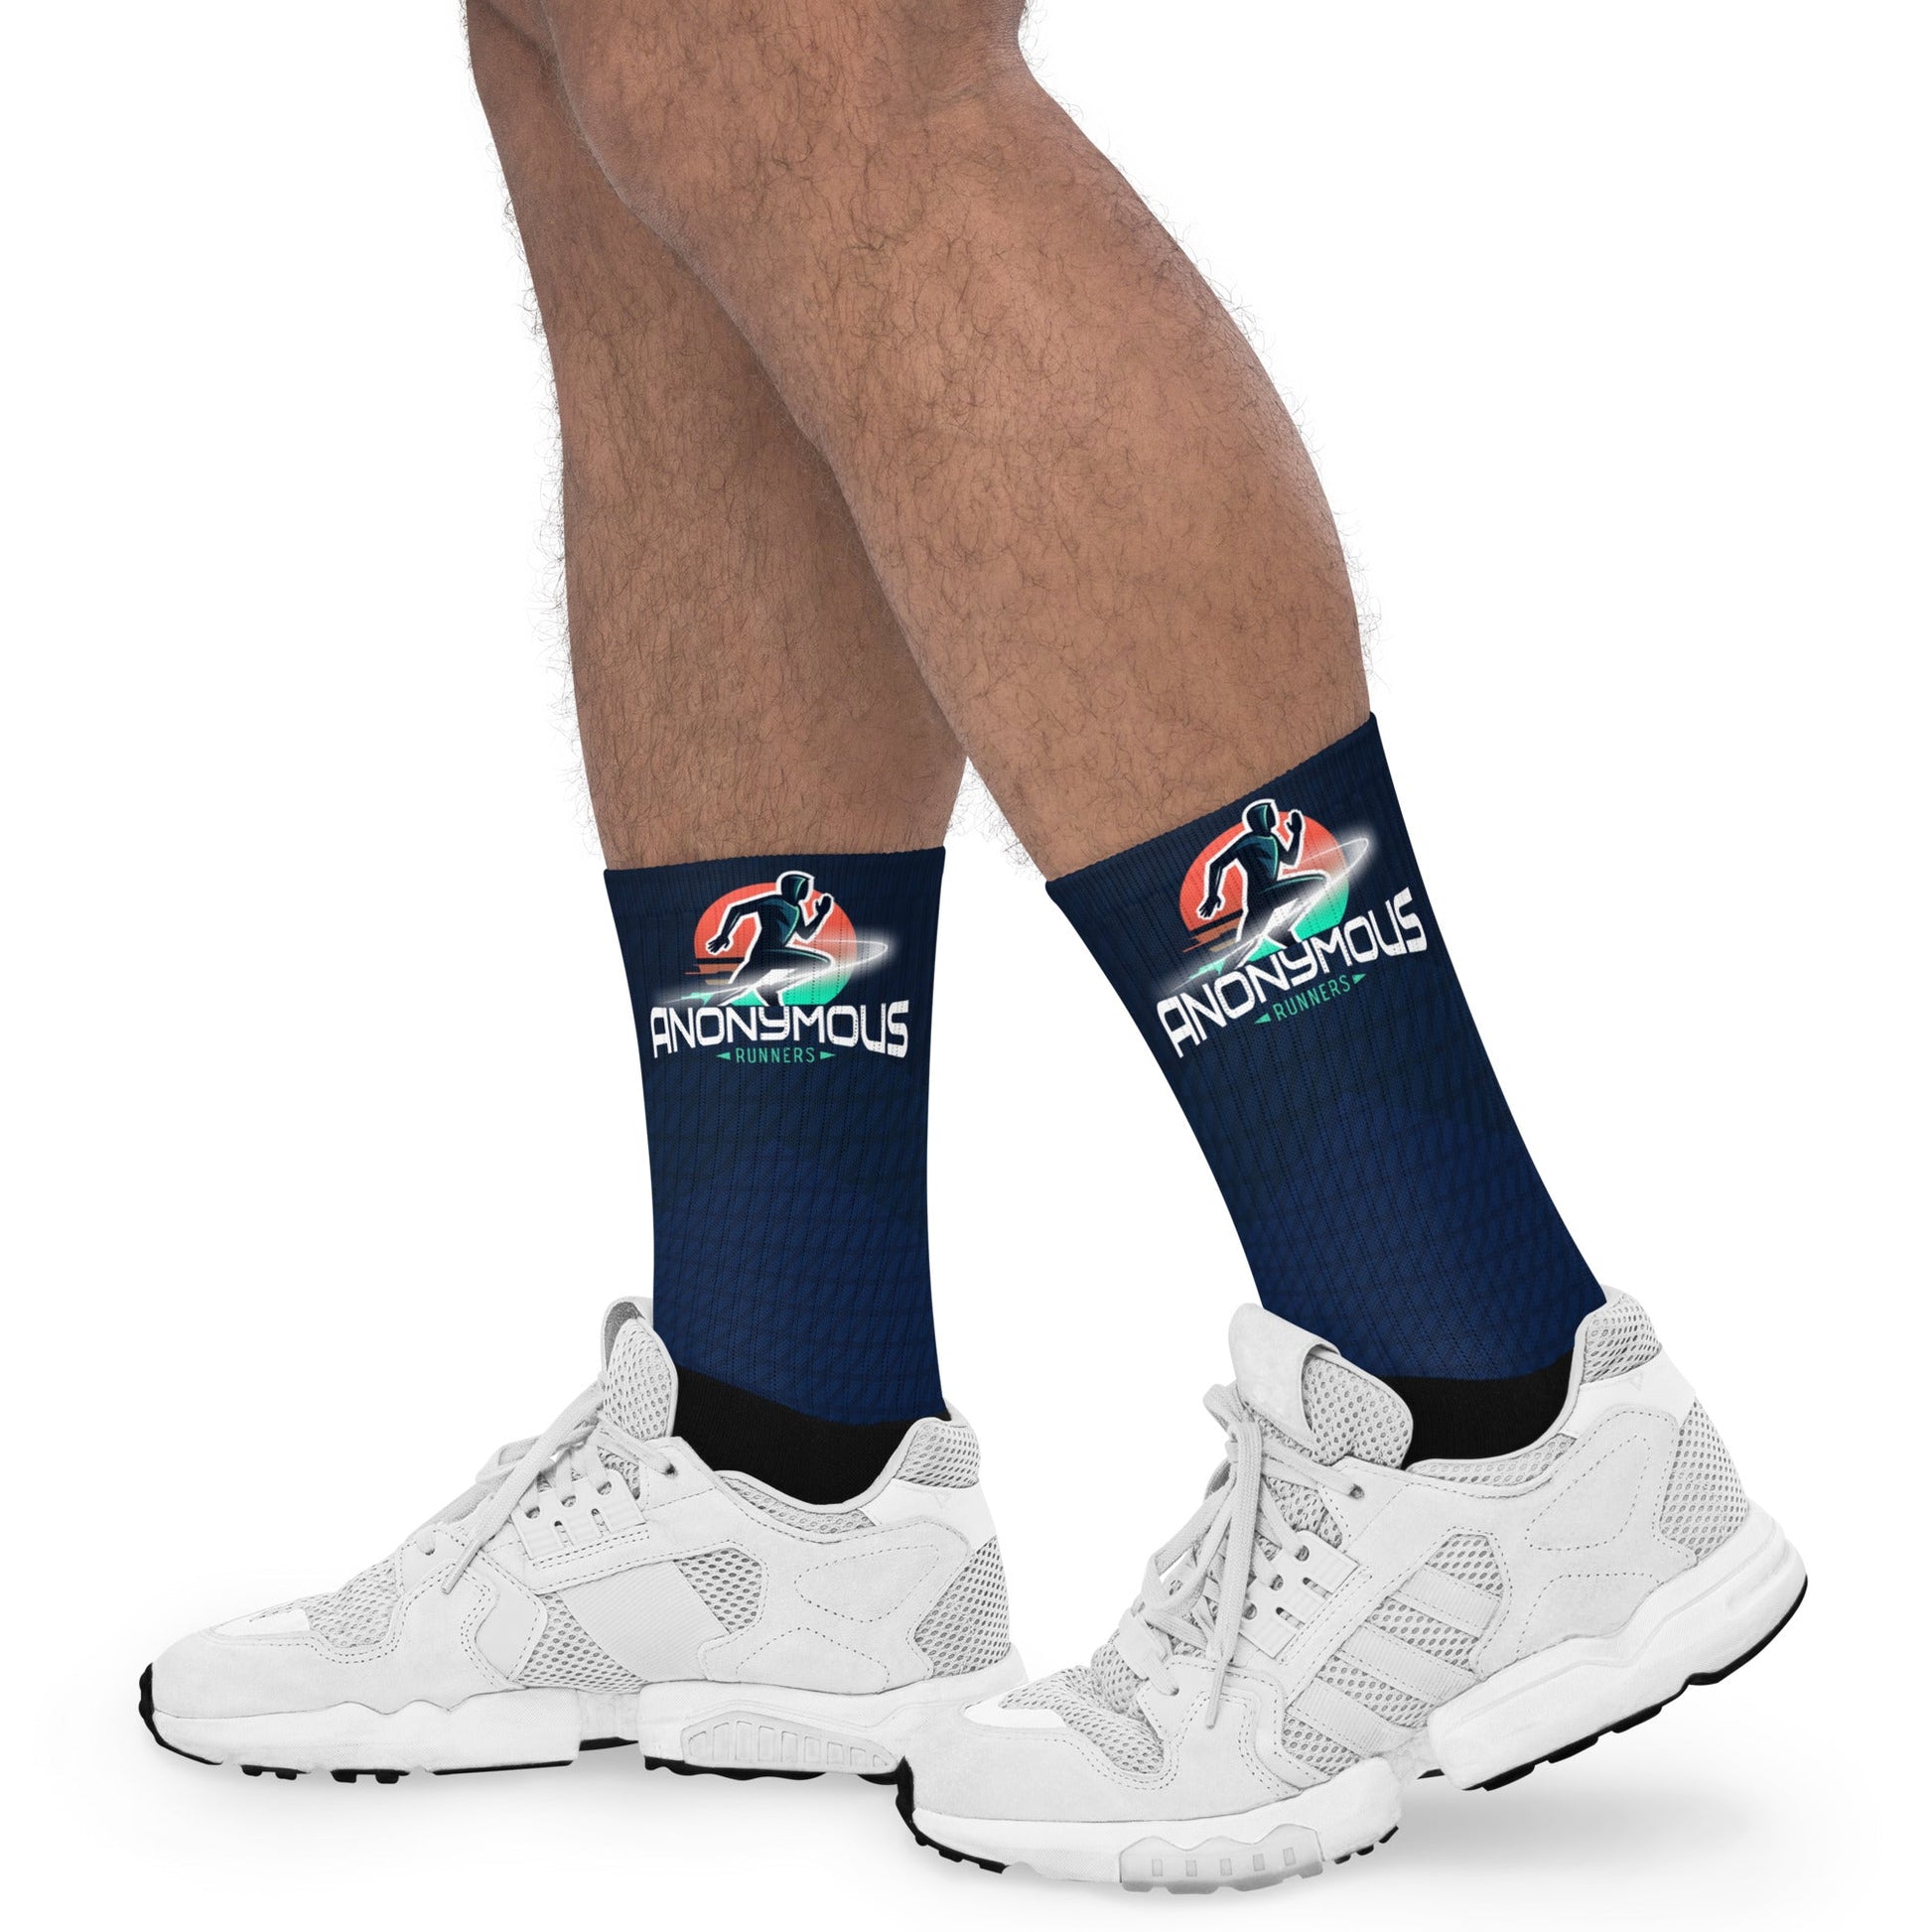 Chaussettes - Anonymous Runners - Le Traileur Anonyme